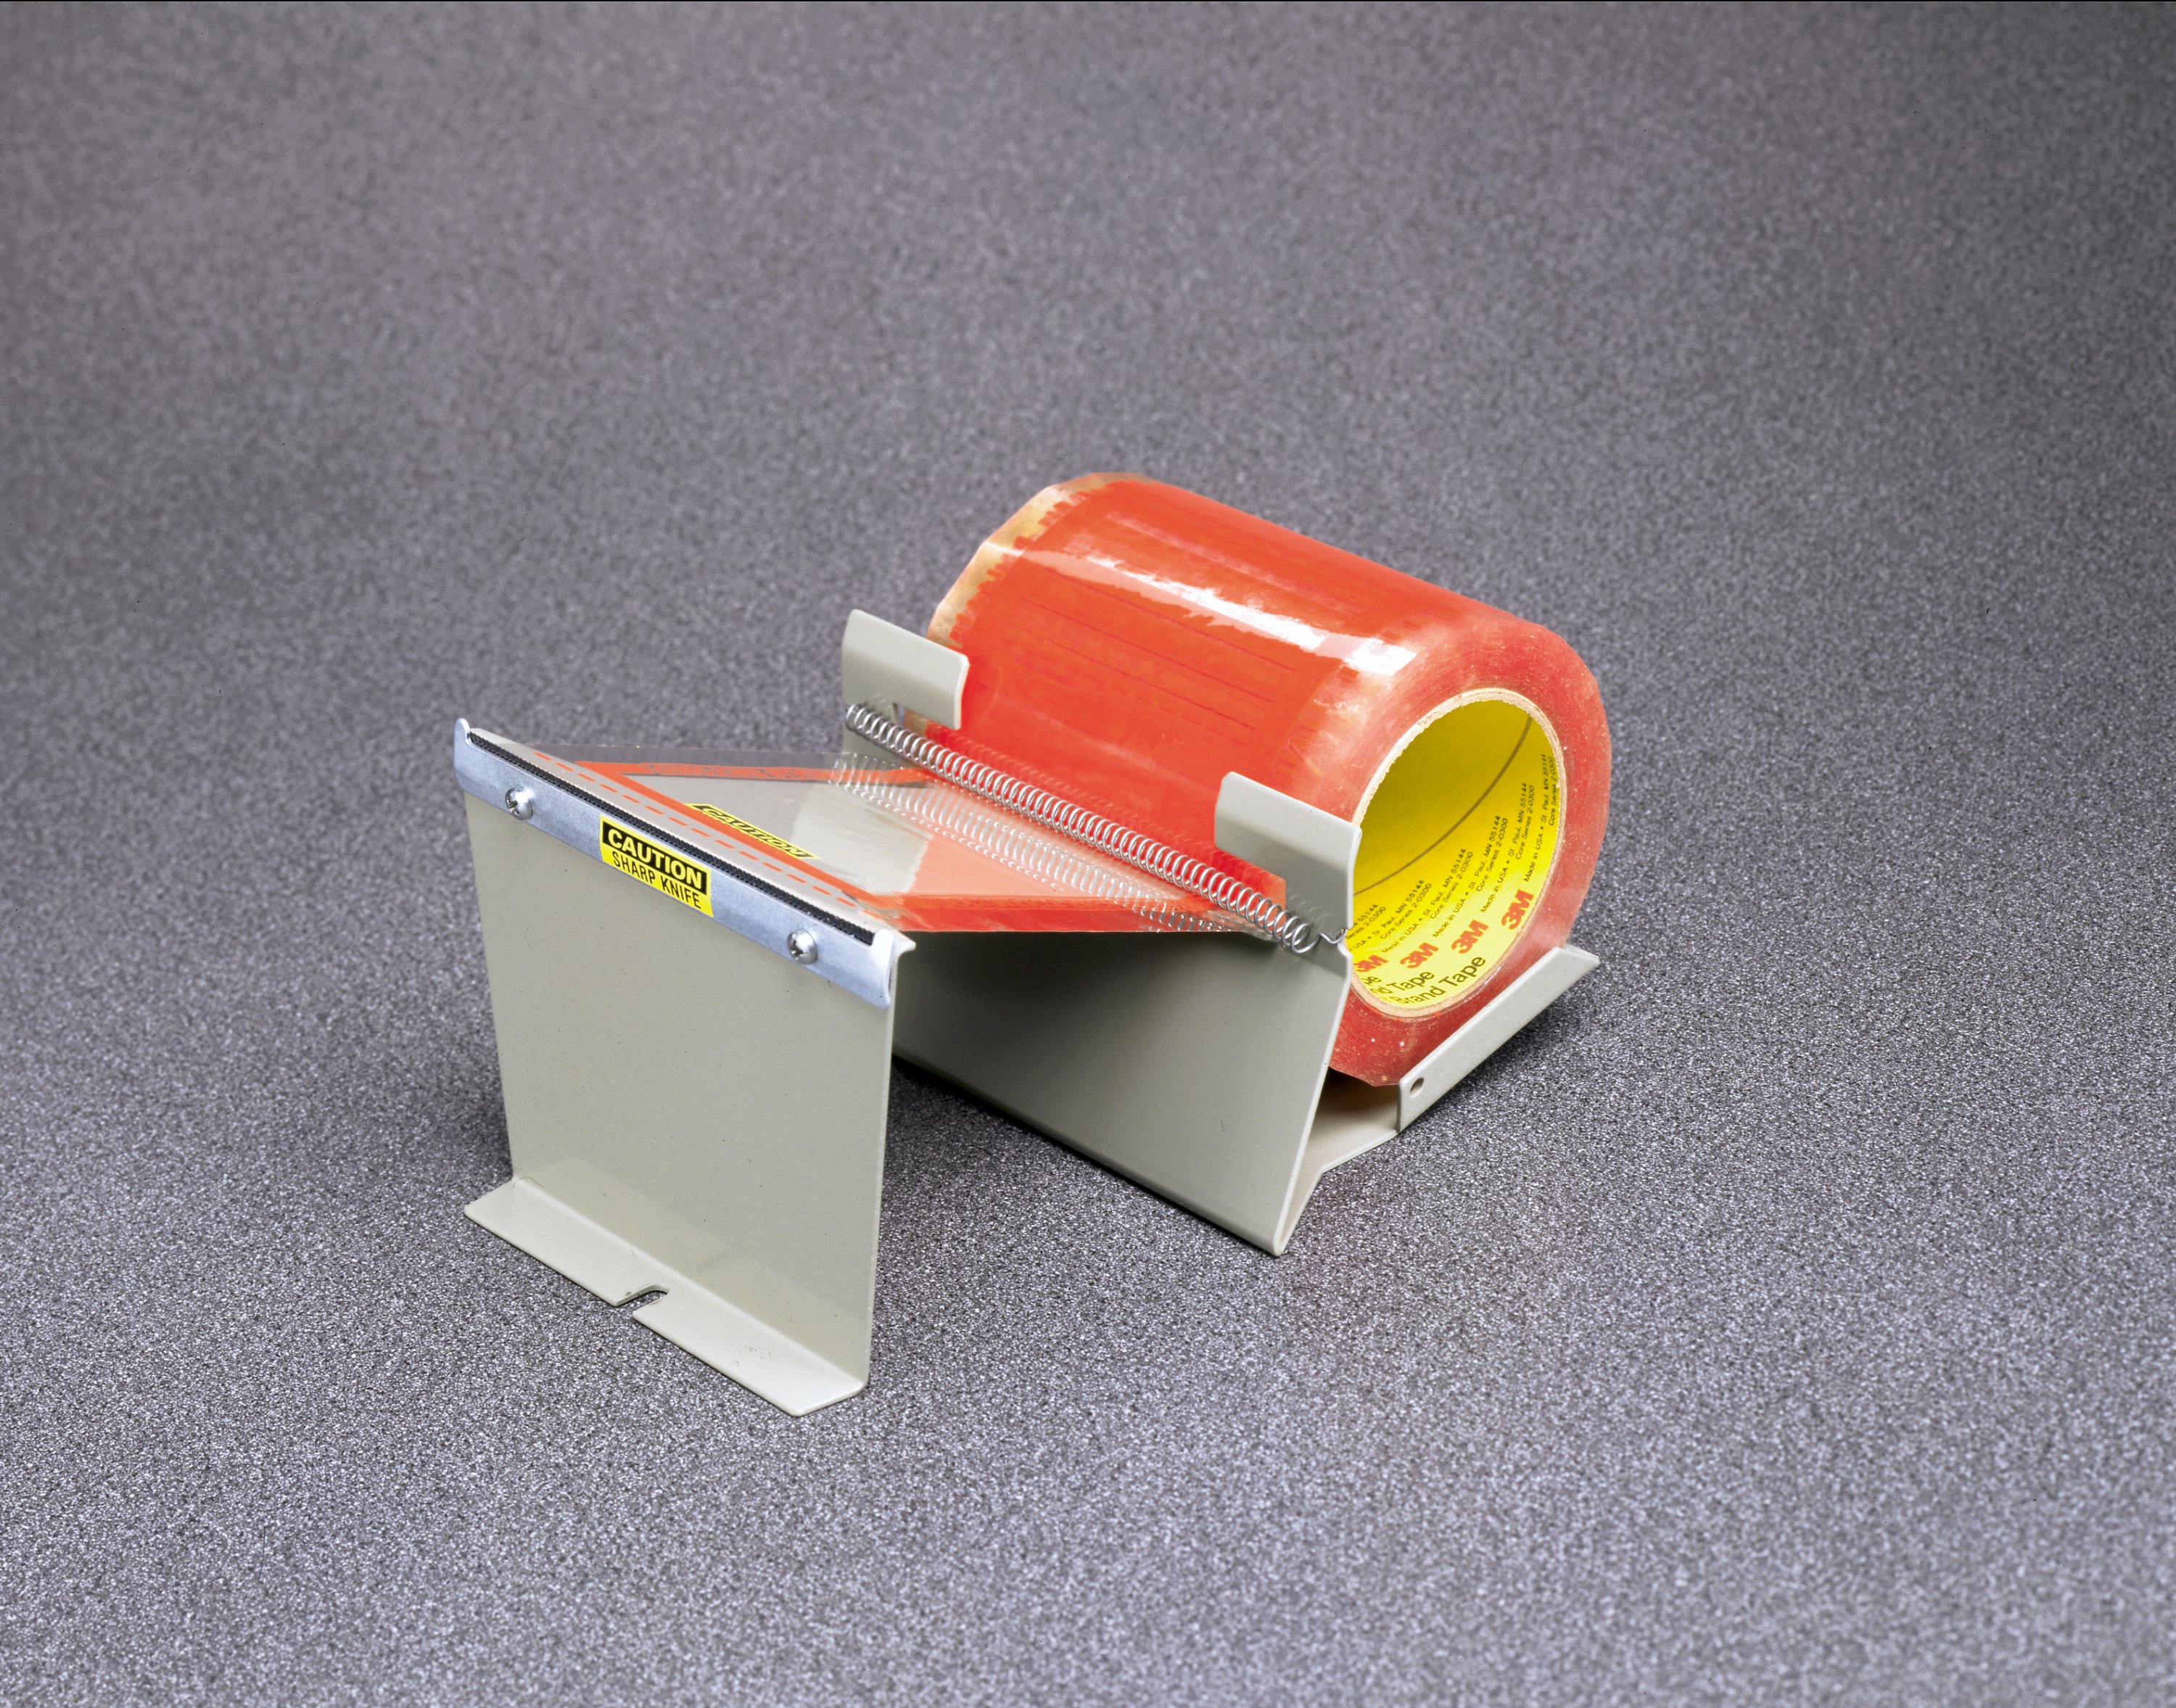 Designed to secure to a table or wall to easily dispense pouch tape